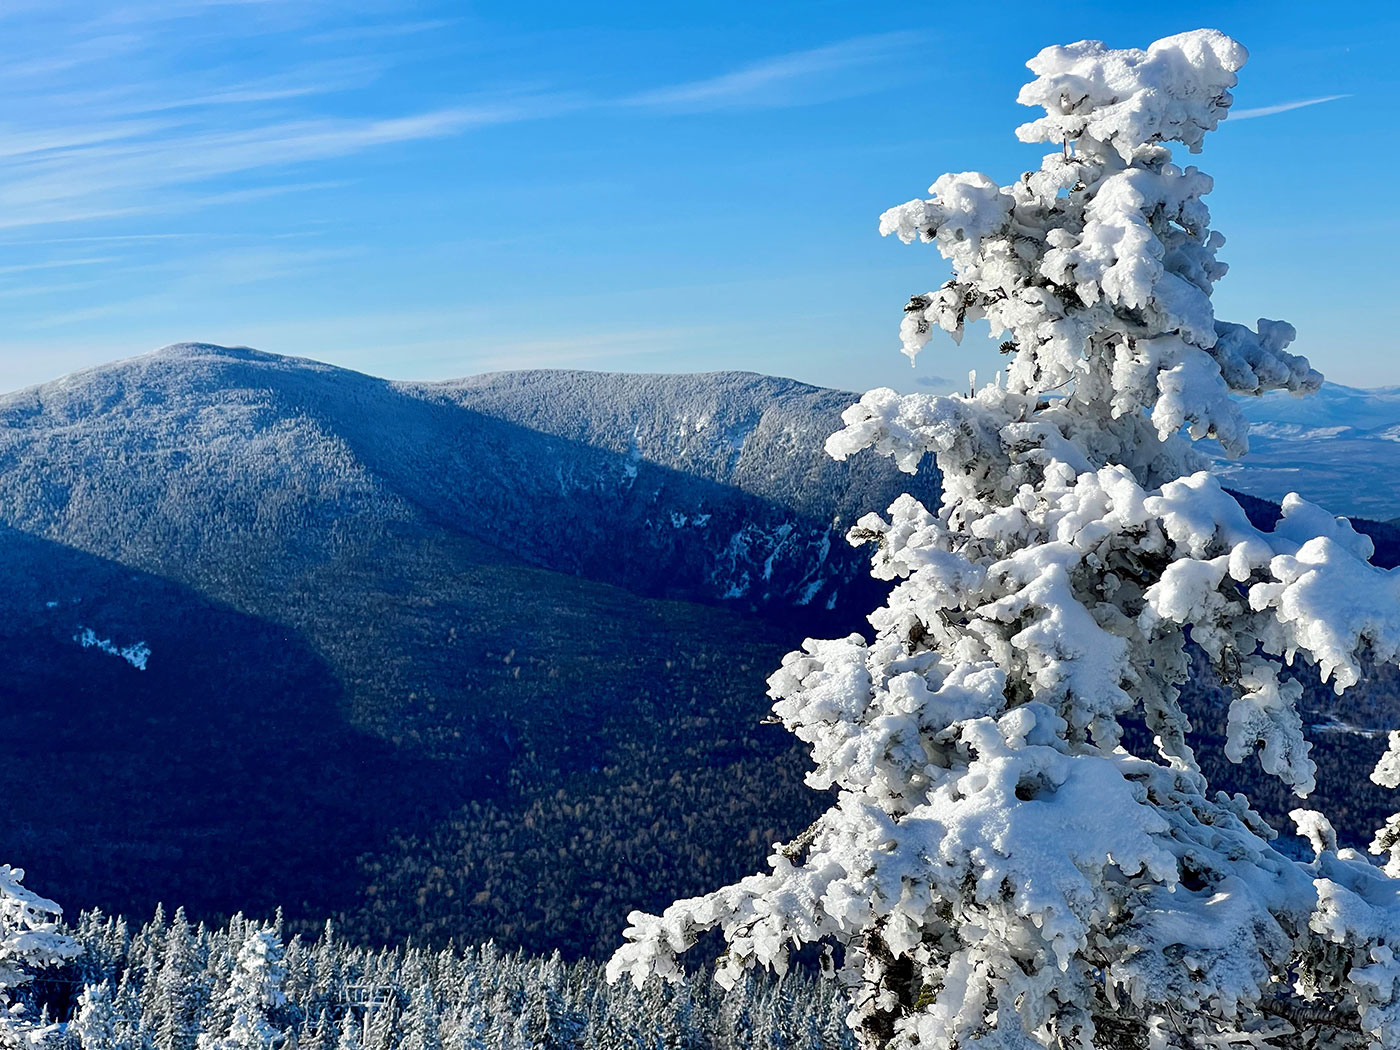 view of mountains from top of another mountain, with snow-covered evergreen tree on right